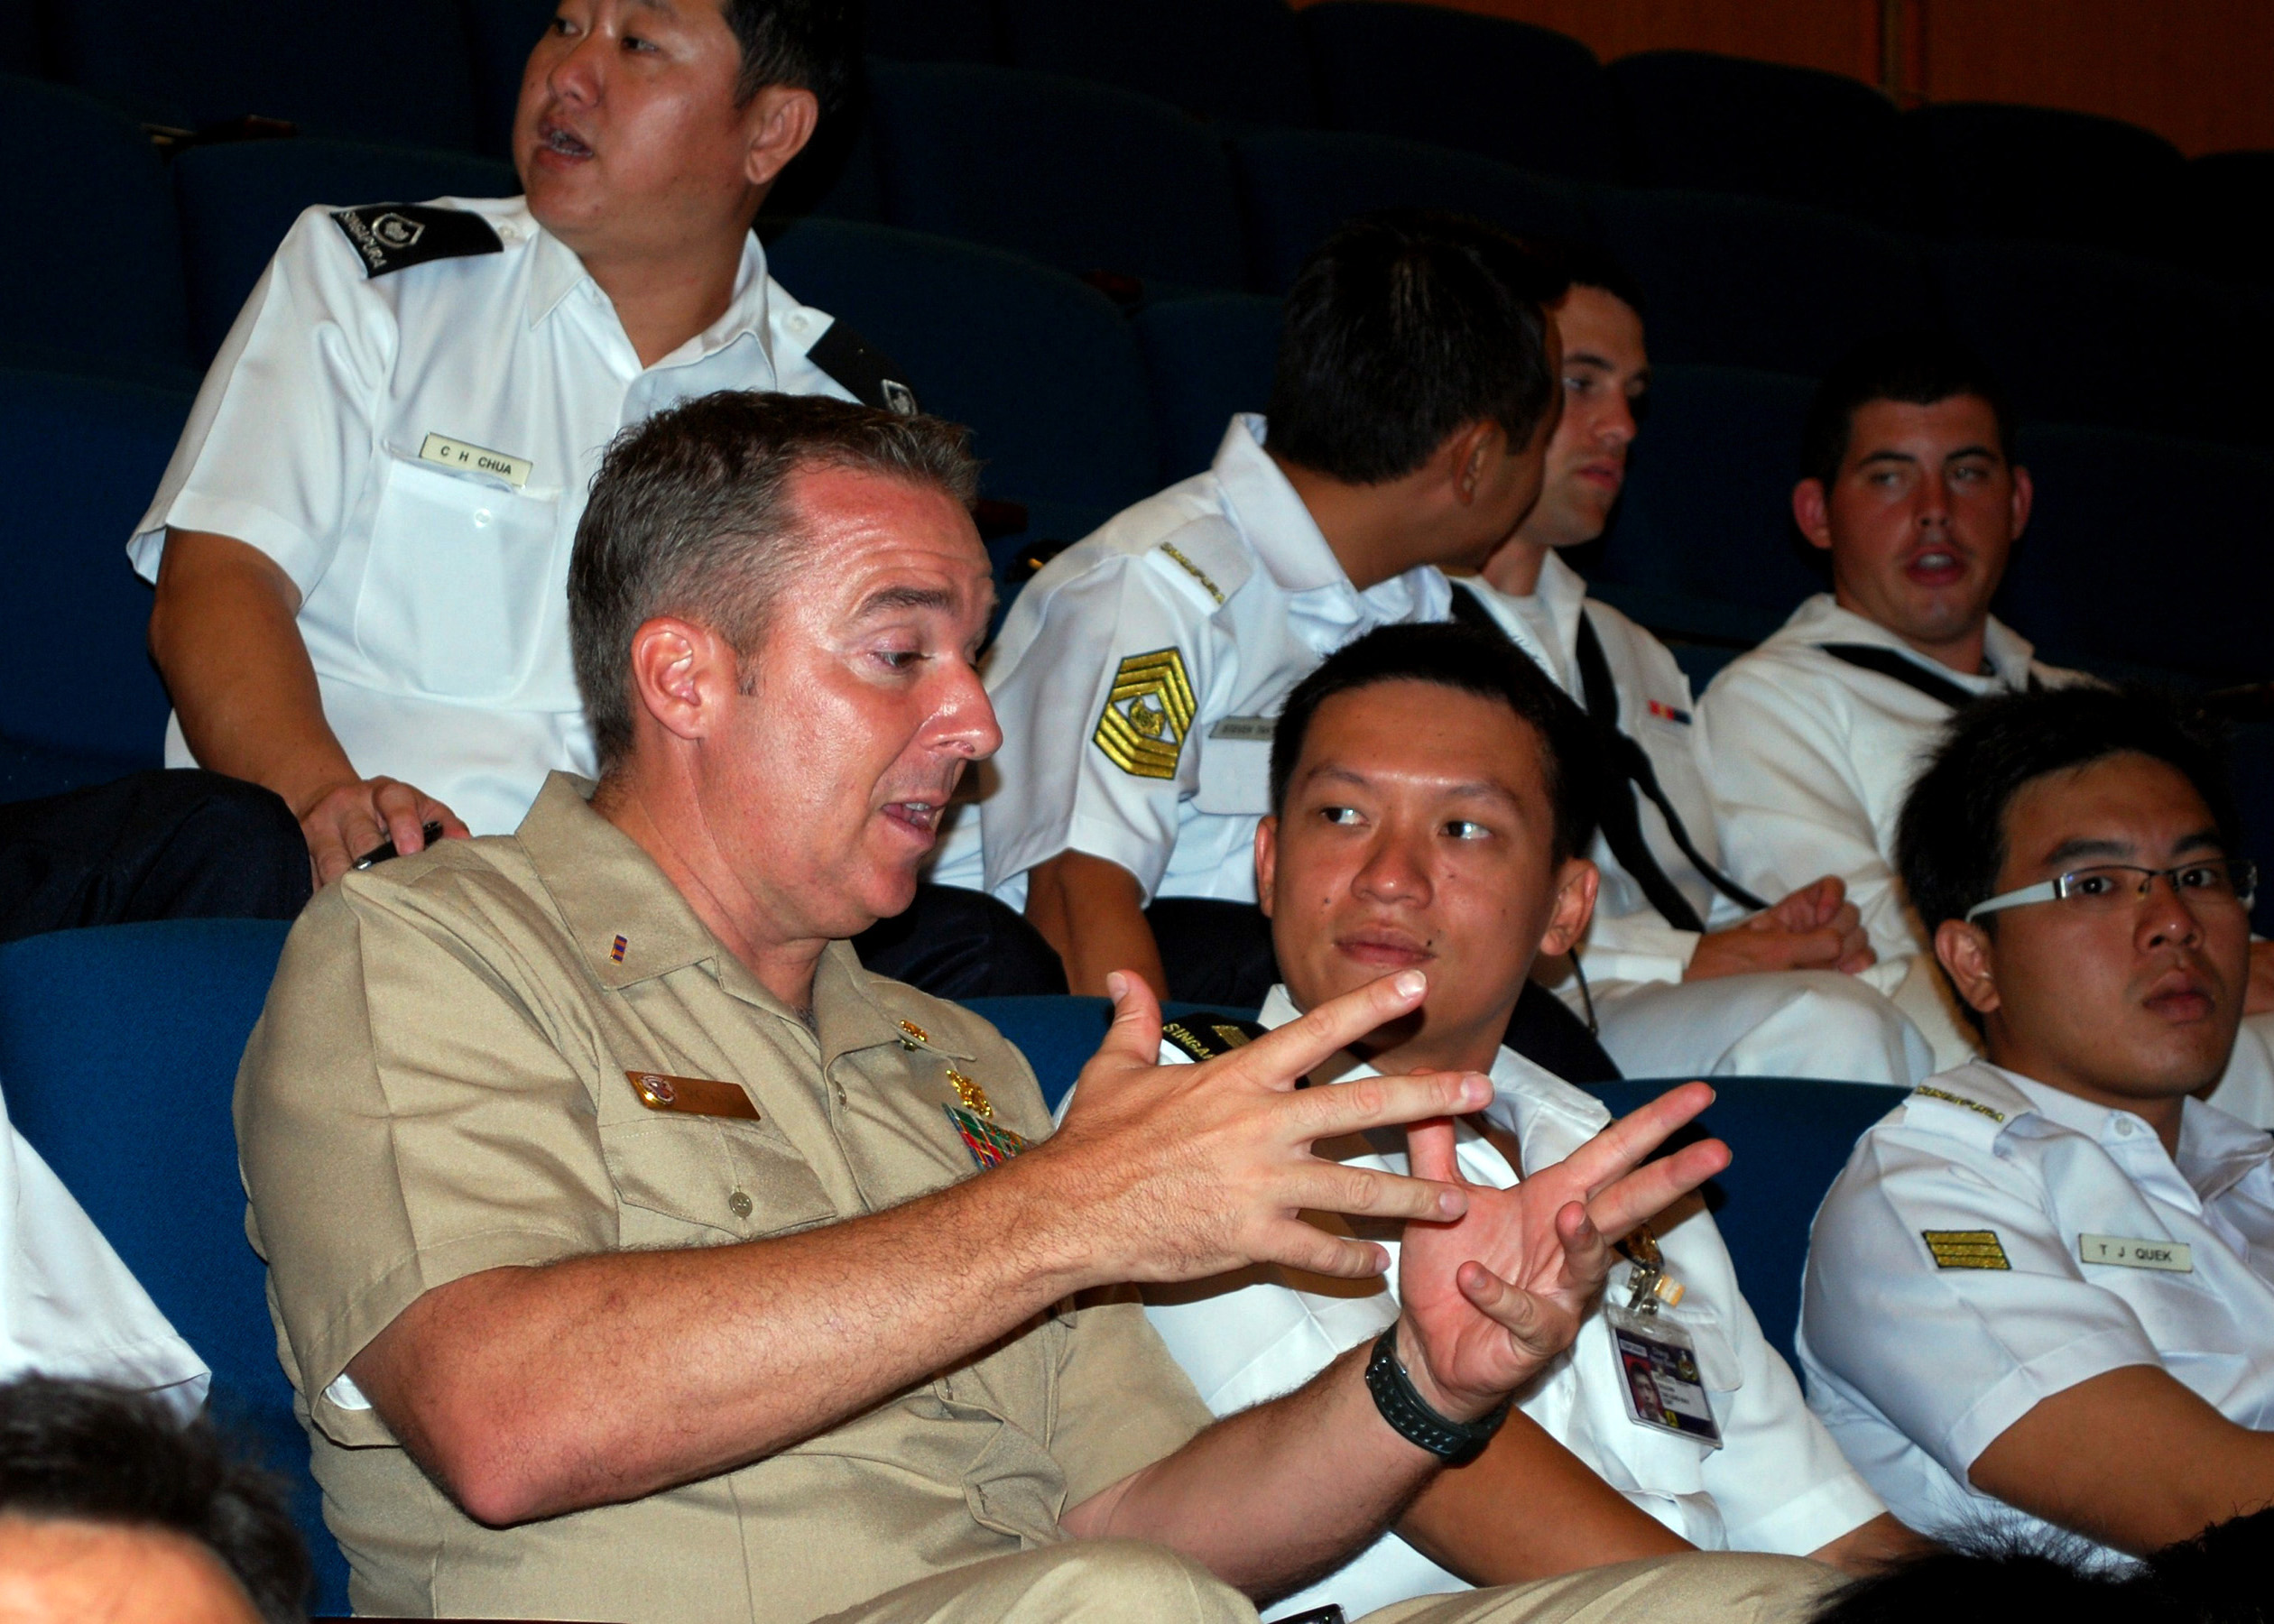 US Navy 090619-N-0869H-017 Chief Warrant Officer Troy Roat, assigned to Mobile Diving and Salvage Unit (MDSU) 1, Company 14, speaks with a Republic of Singapore Navy officer